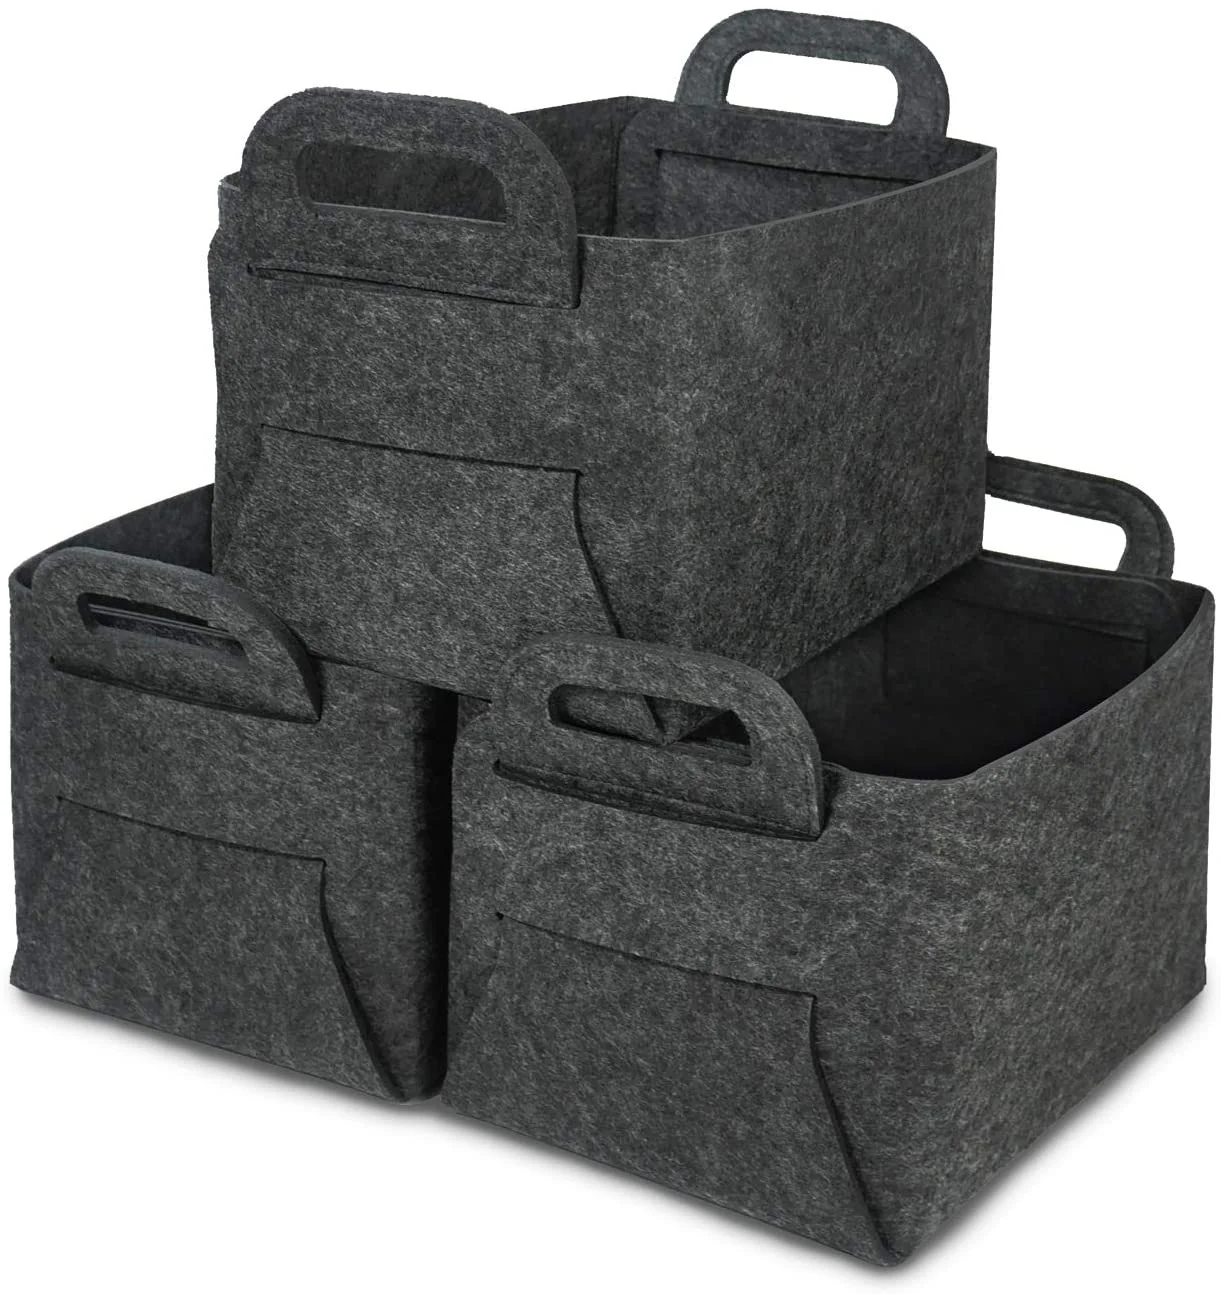 

Foldable Felt Fabric Storage Basket Collapsible Storage Bins for Nursery Kids, Customized color